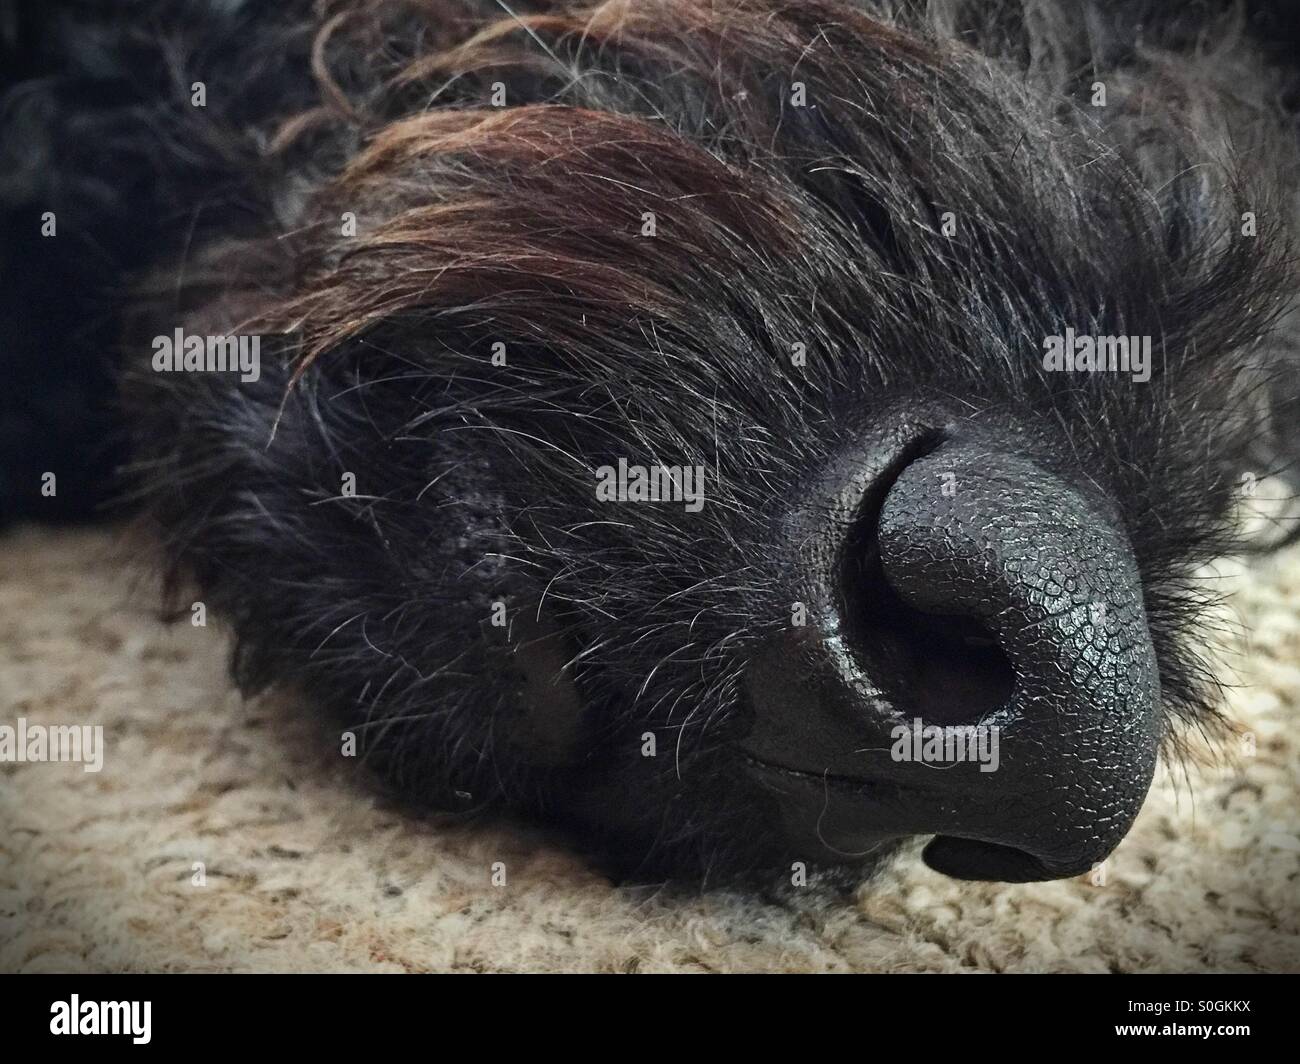 Close up of the nose of a very furry black dog Stock Photo